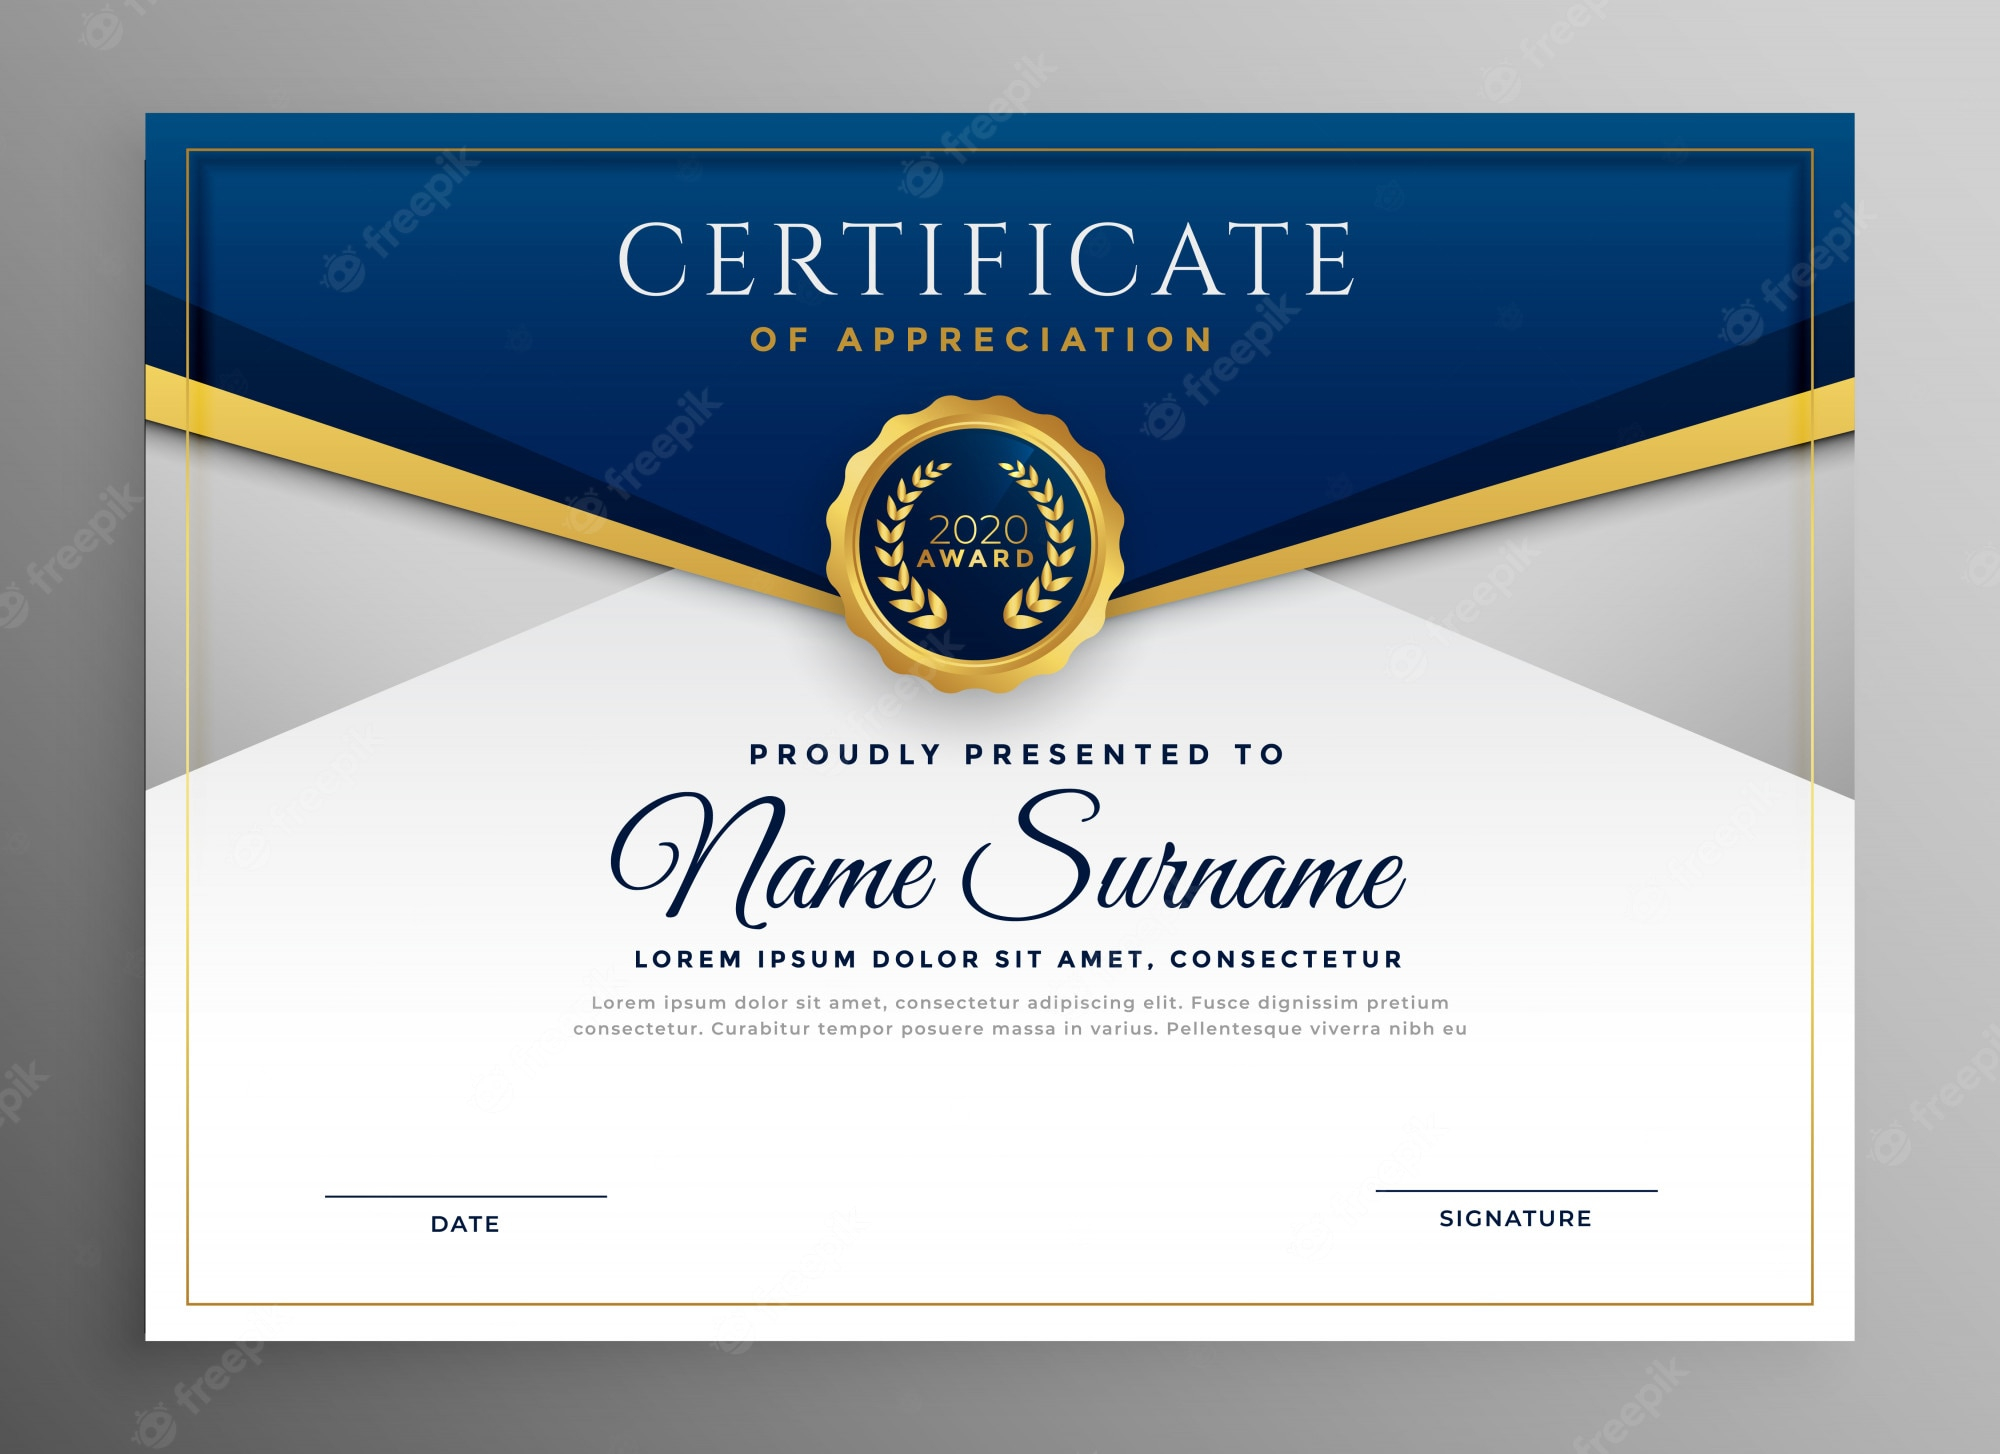 Certificate Images - Free Download on Freepik With Award Certificate Design Template